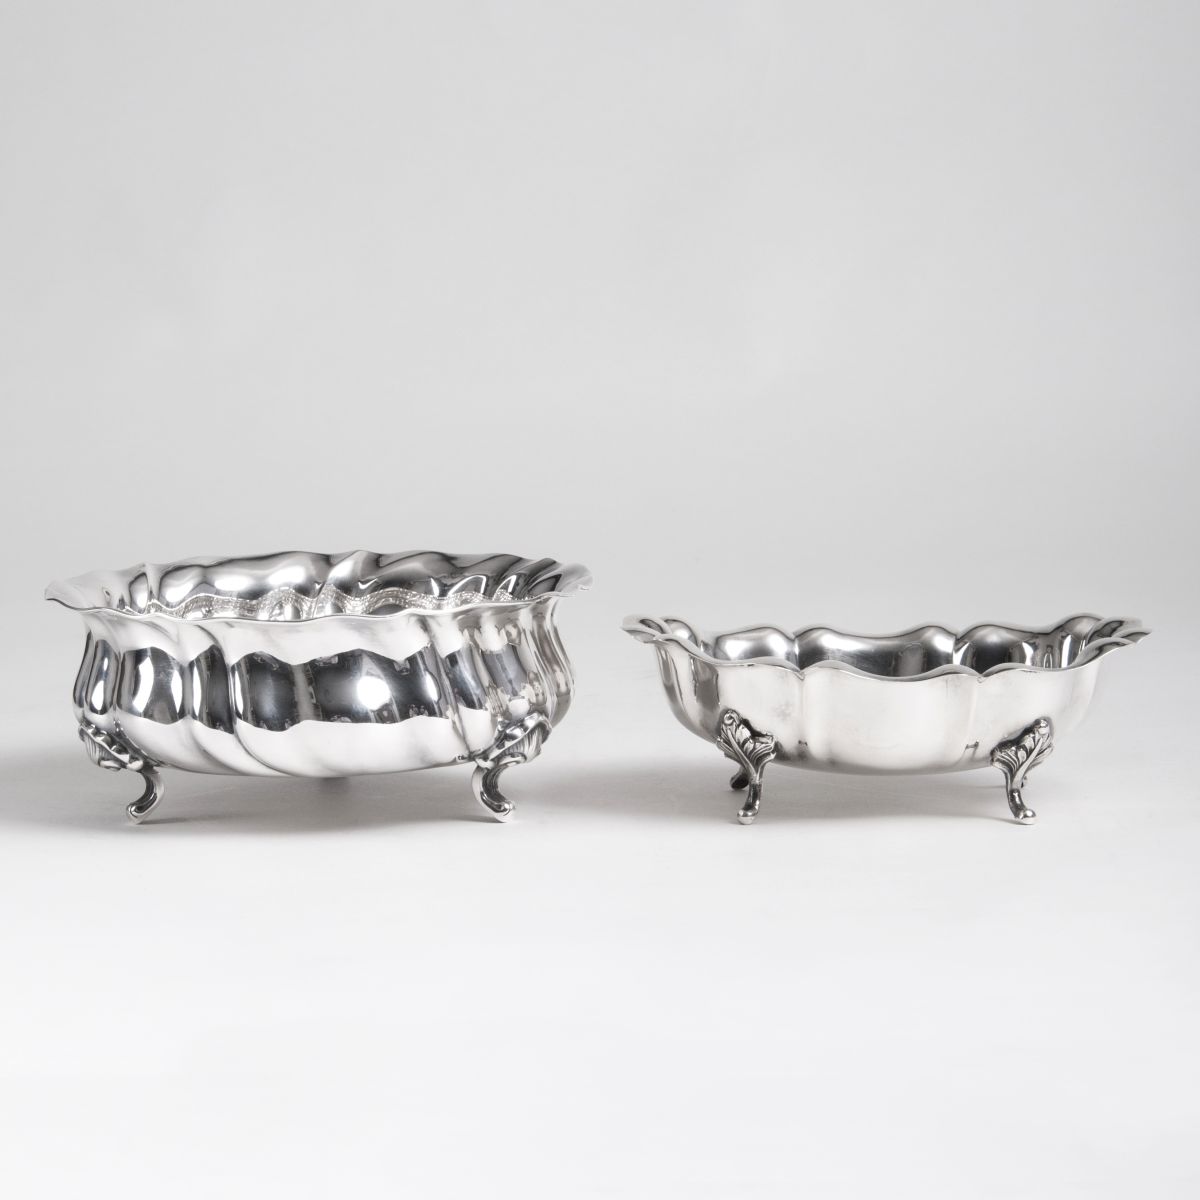 Two bowls in the style of Chippendale